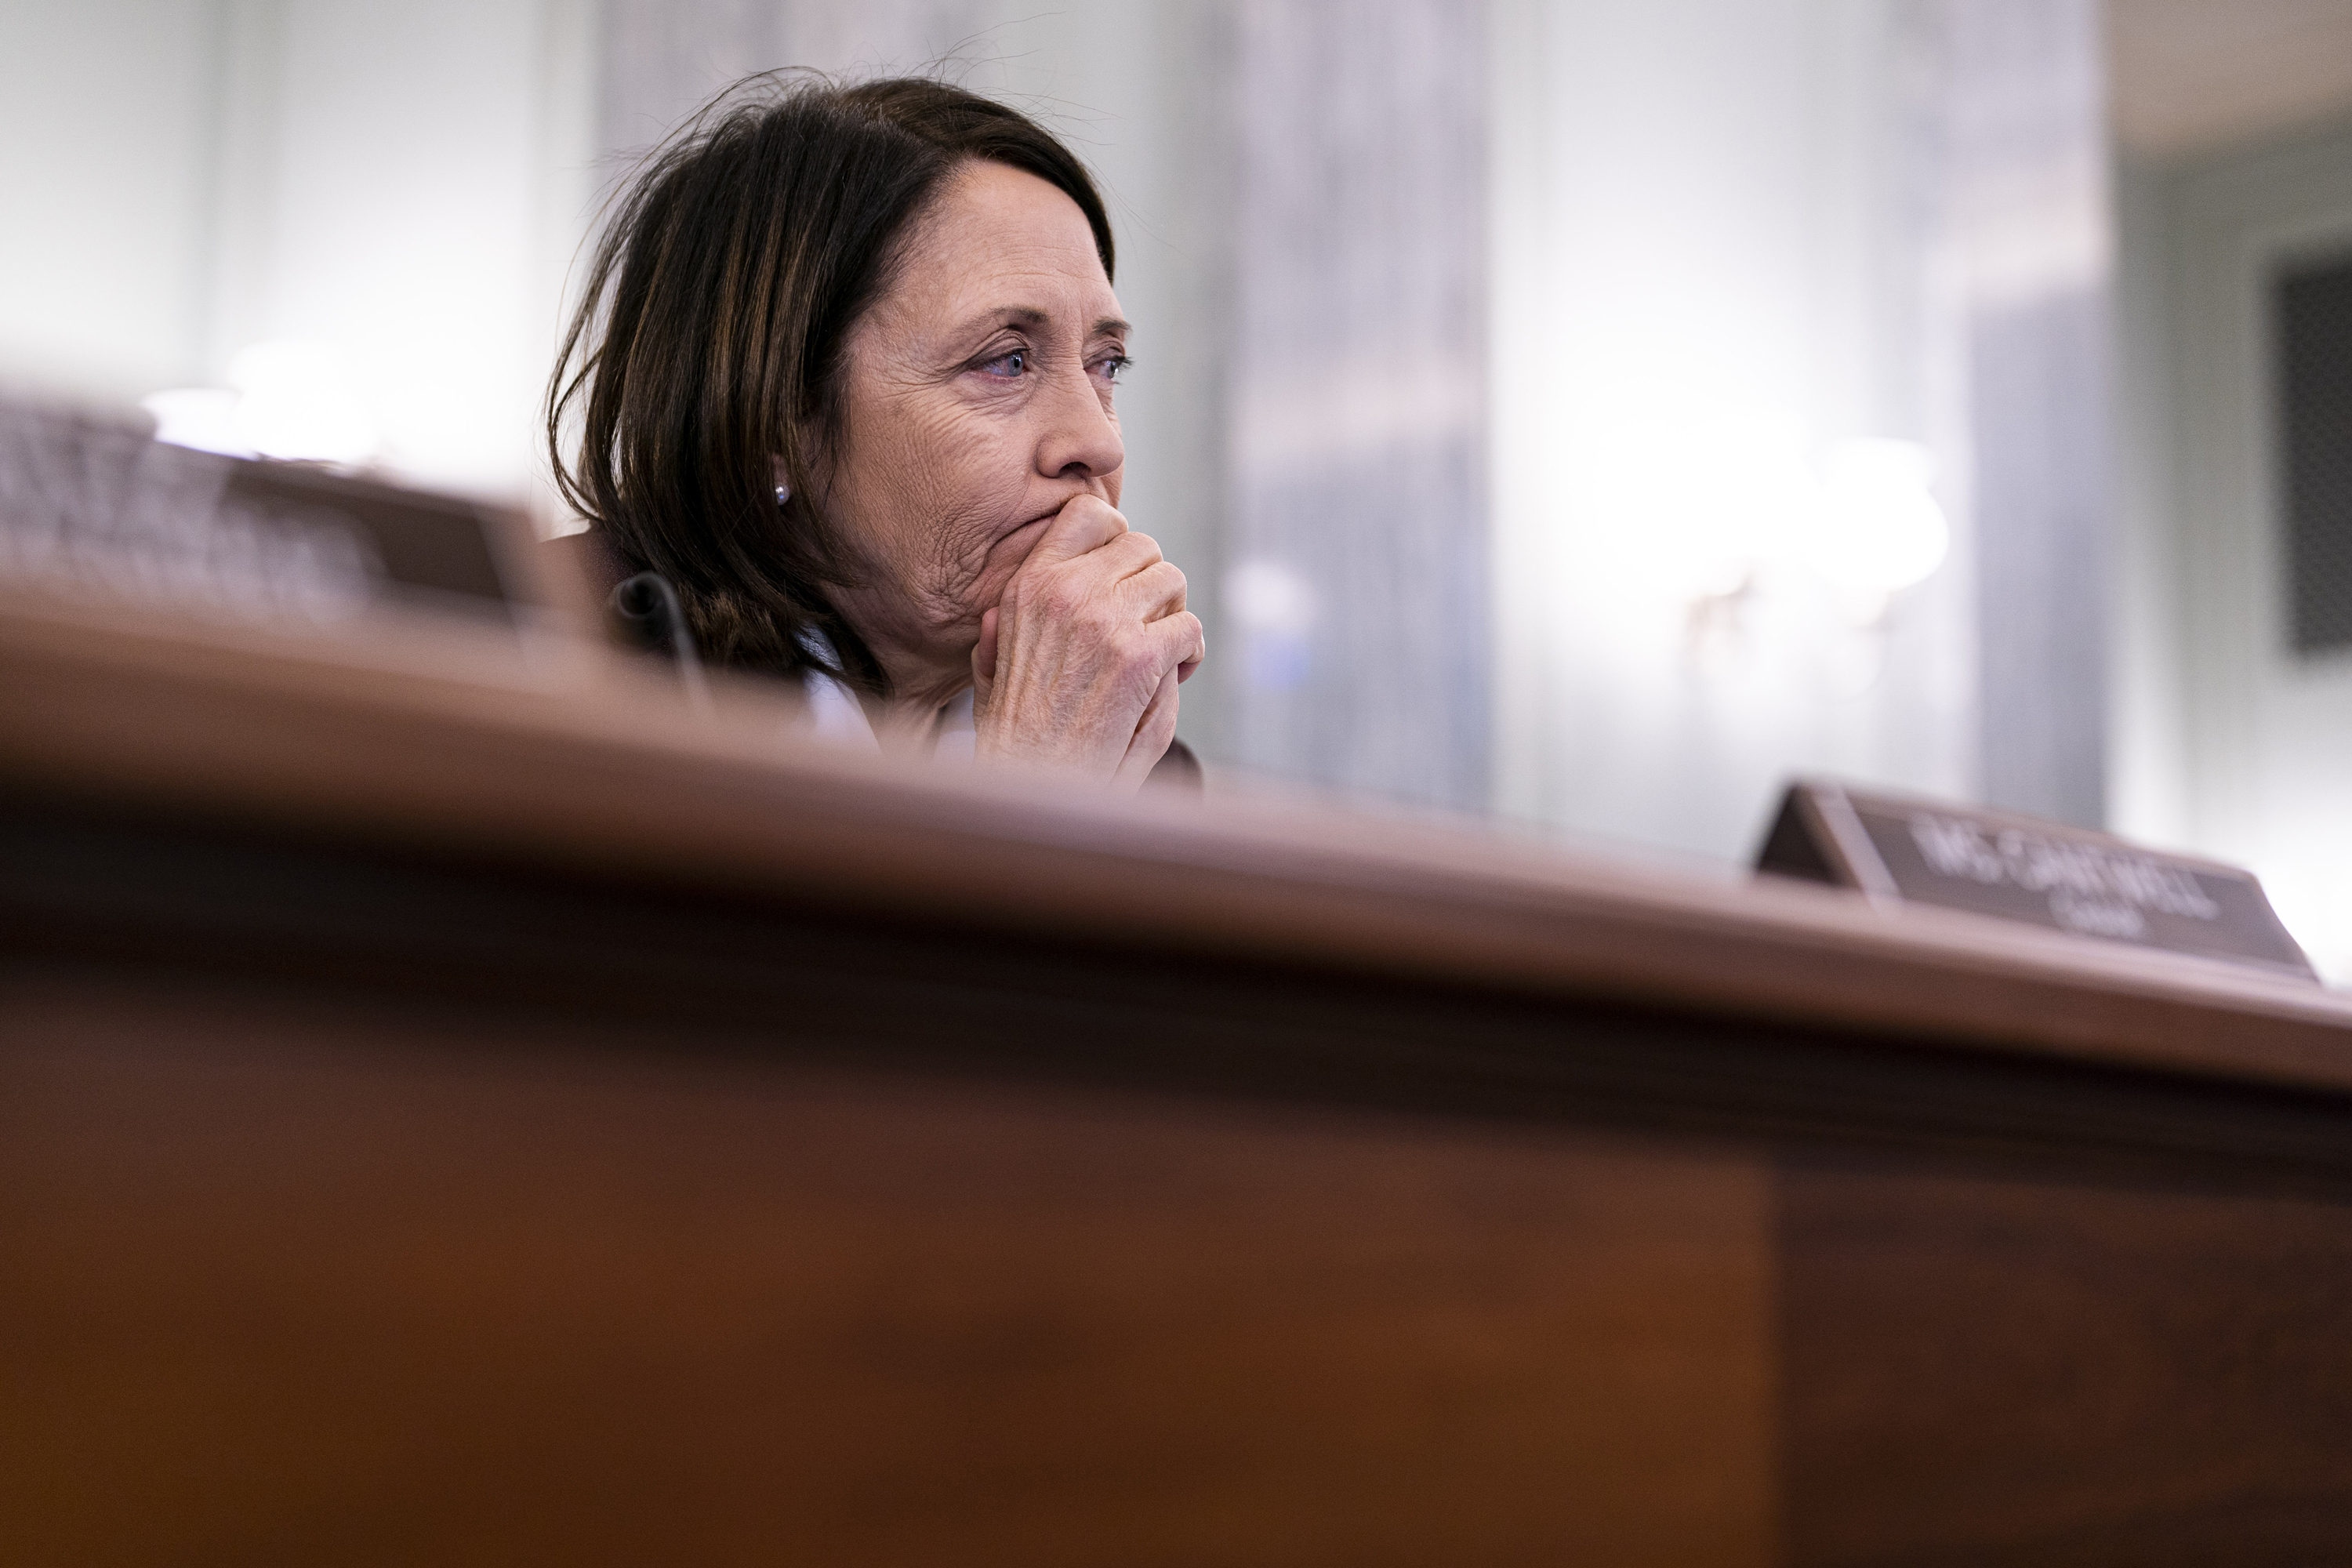 Maria Cantwell during a hearing in Washington, DC, on February 9, 2023.